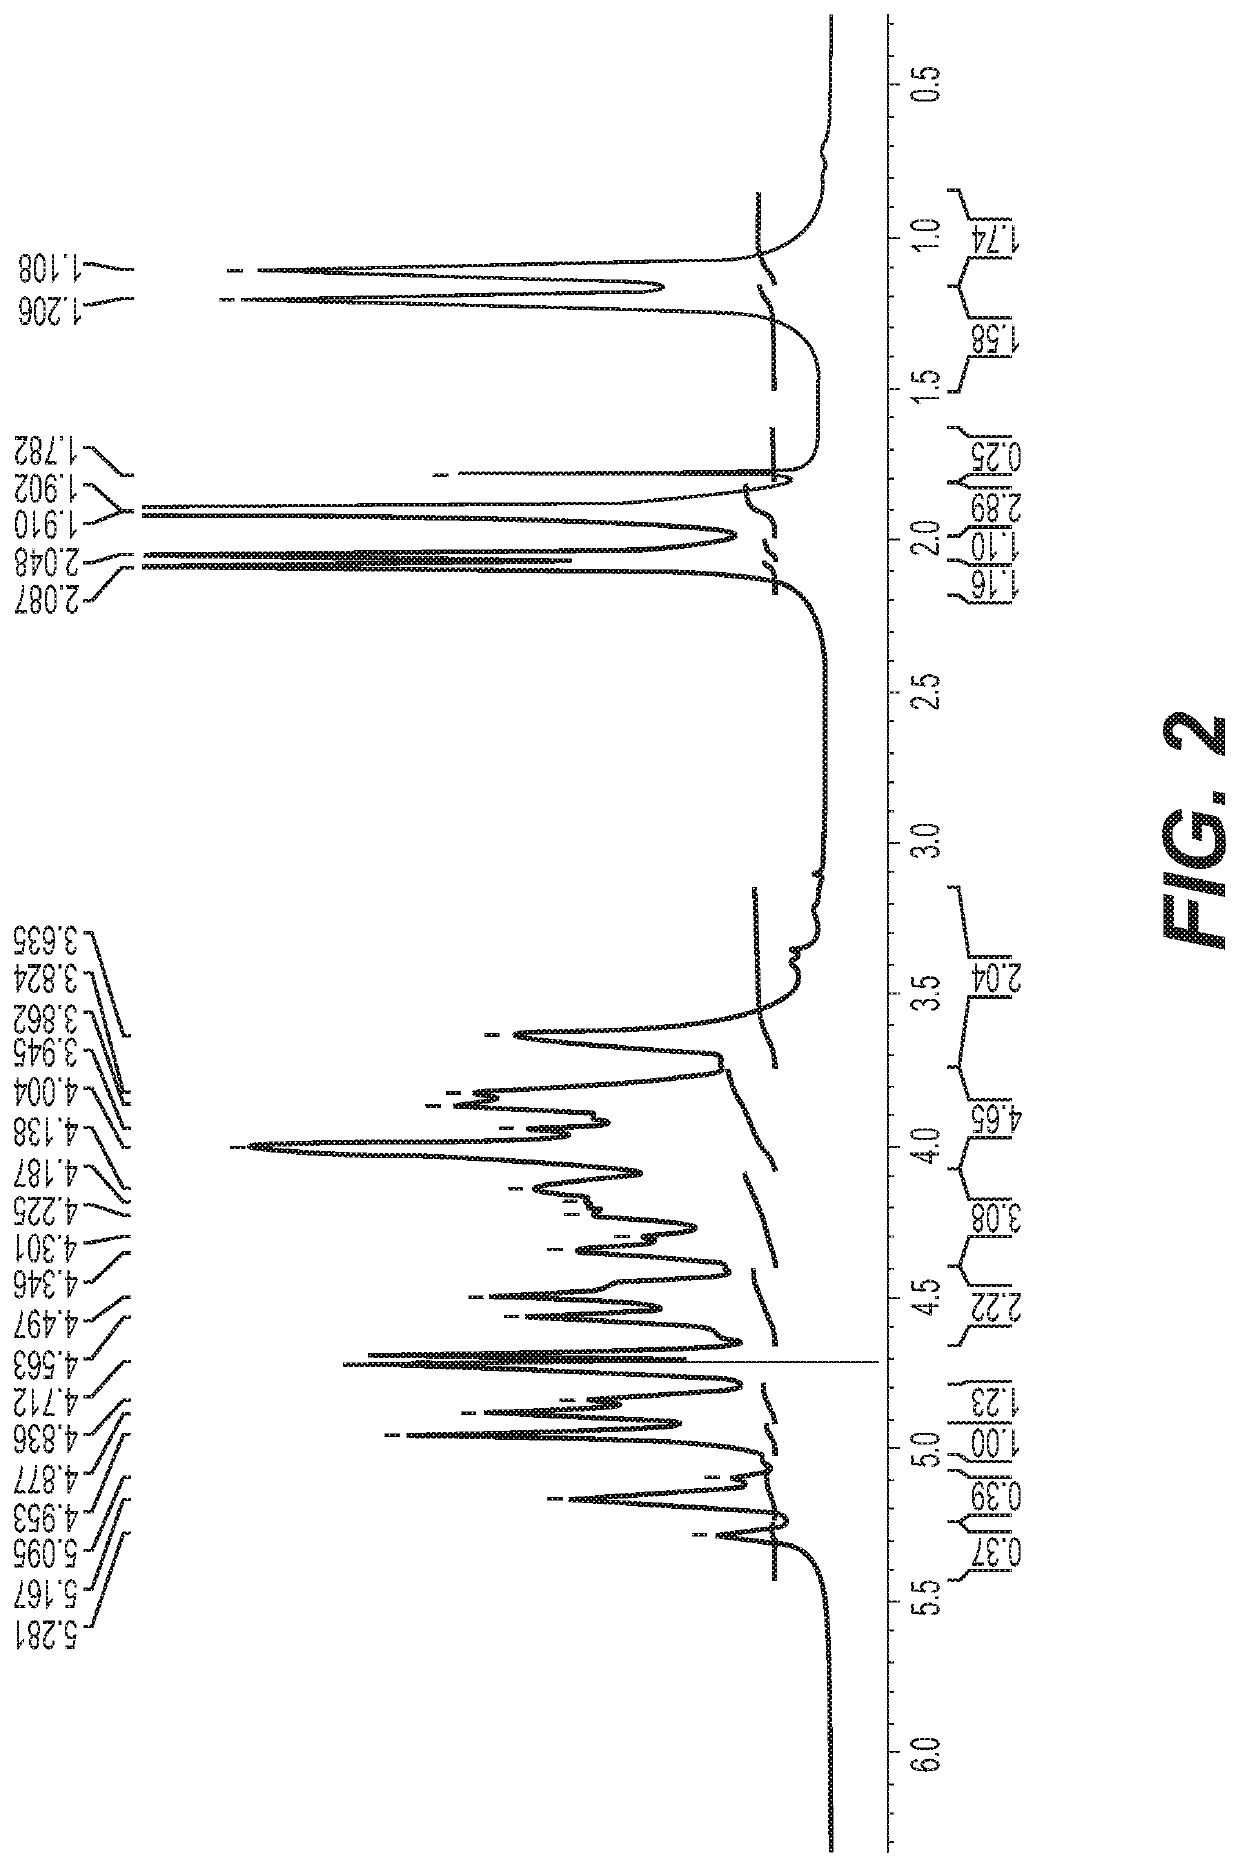 Polysaccharide purification for vaccine production using lytic enzymes, tangential flow filtration, and multimode chromatography